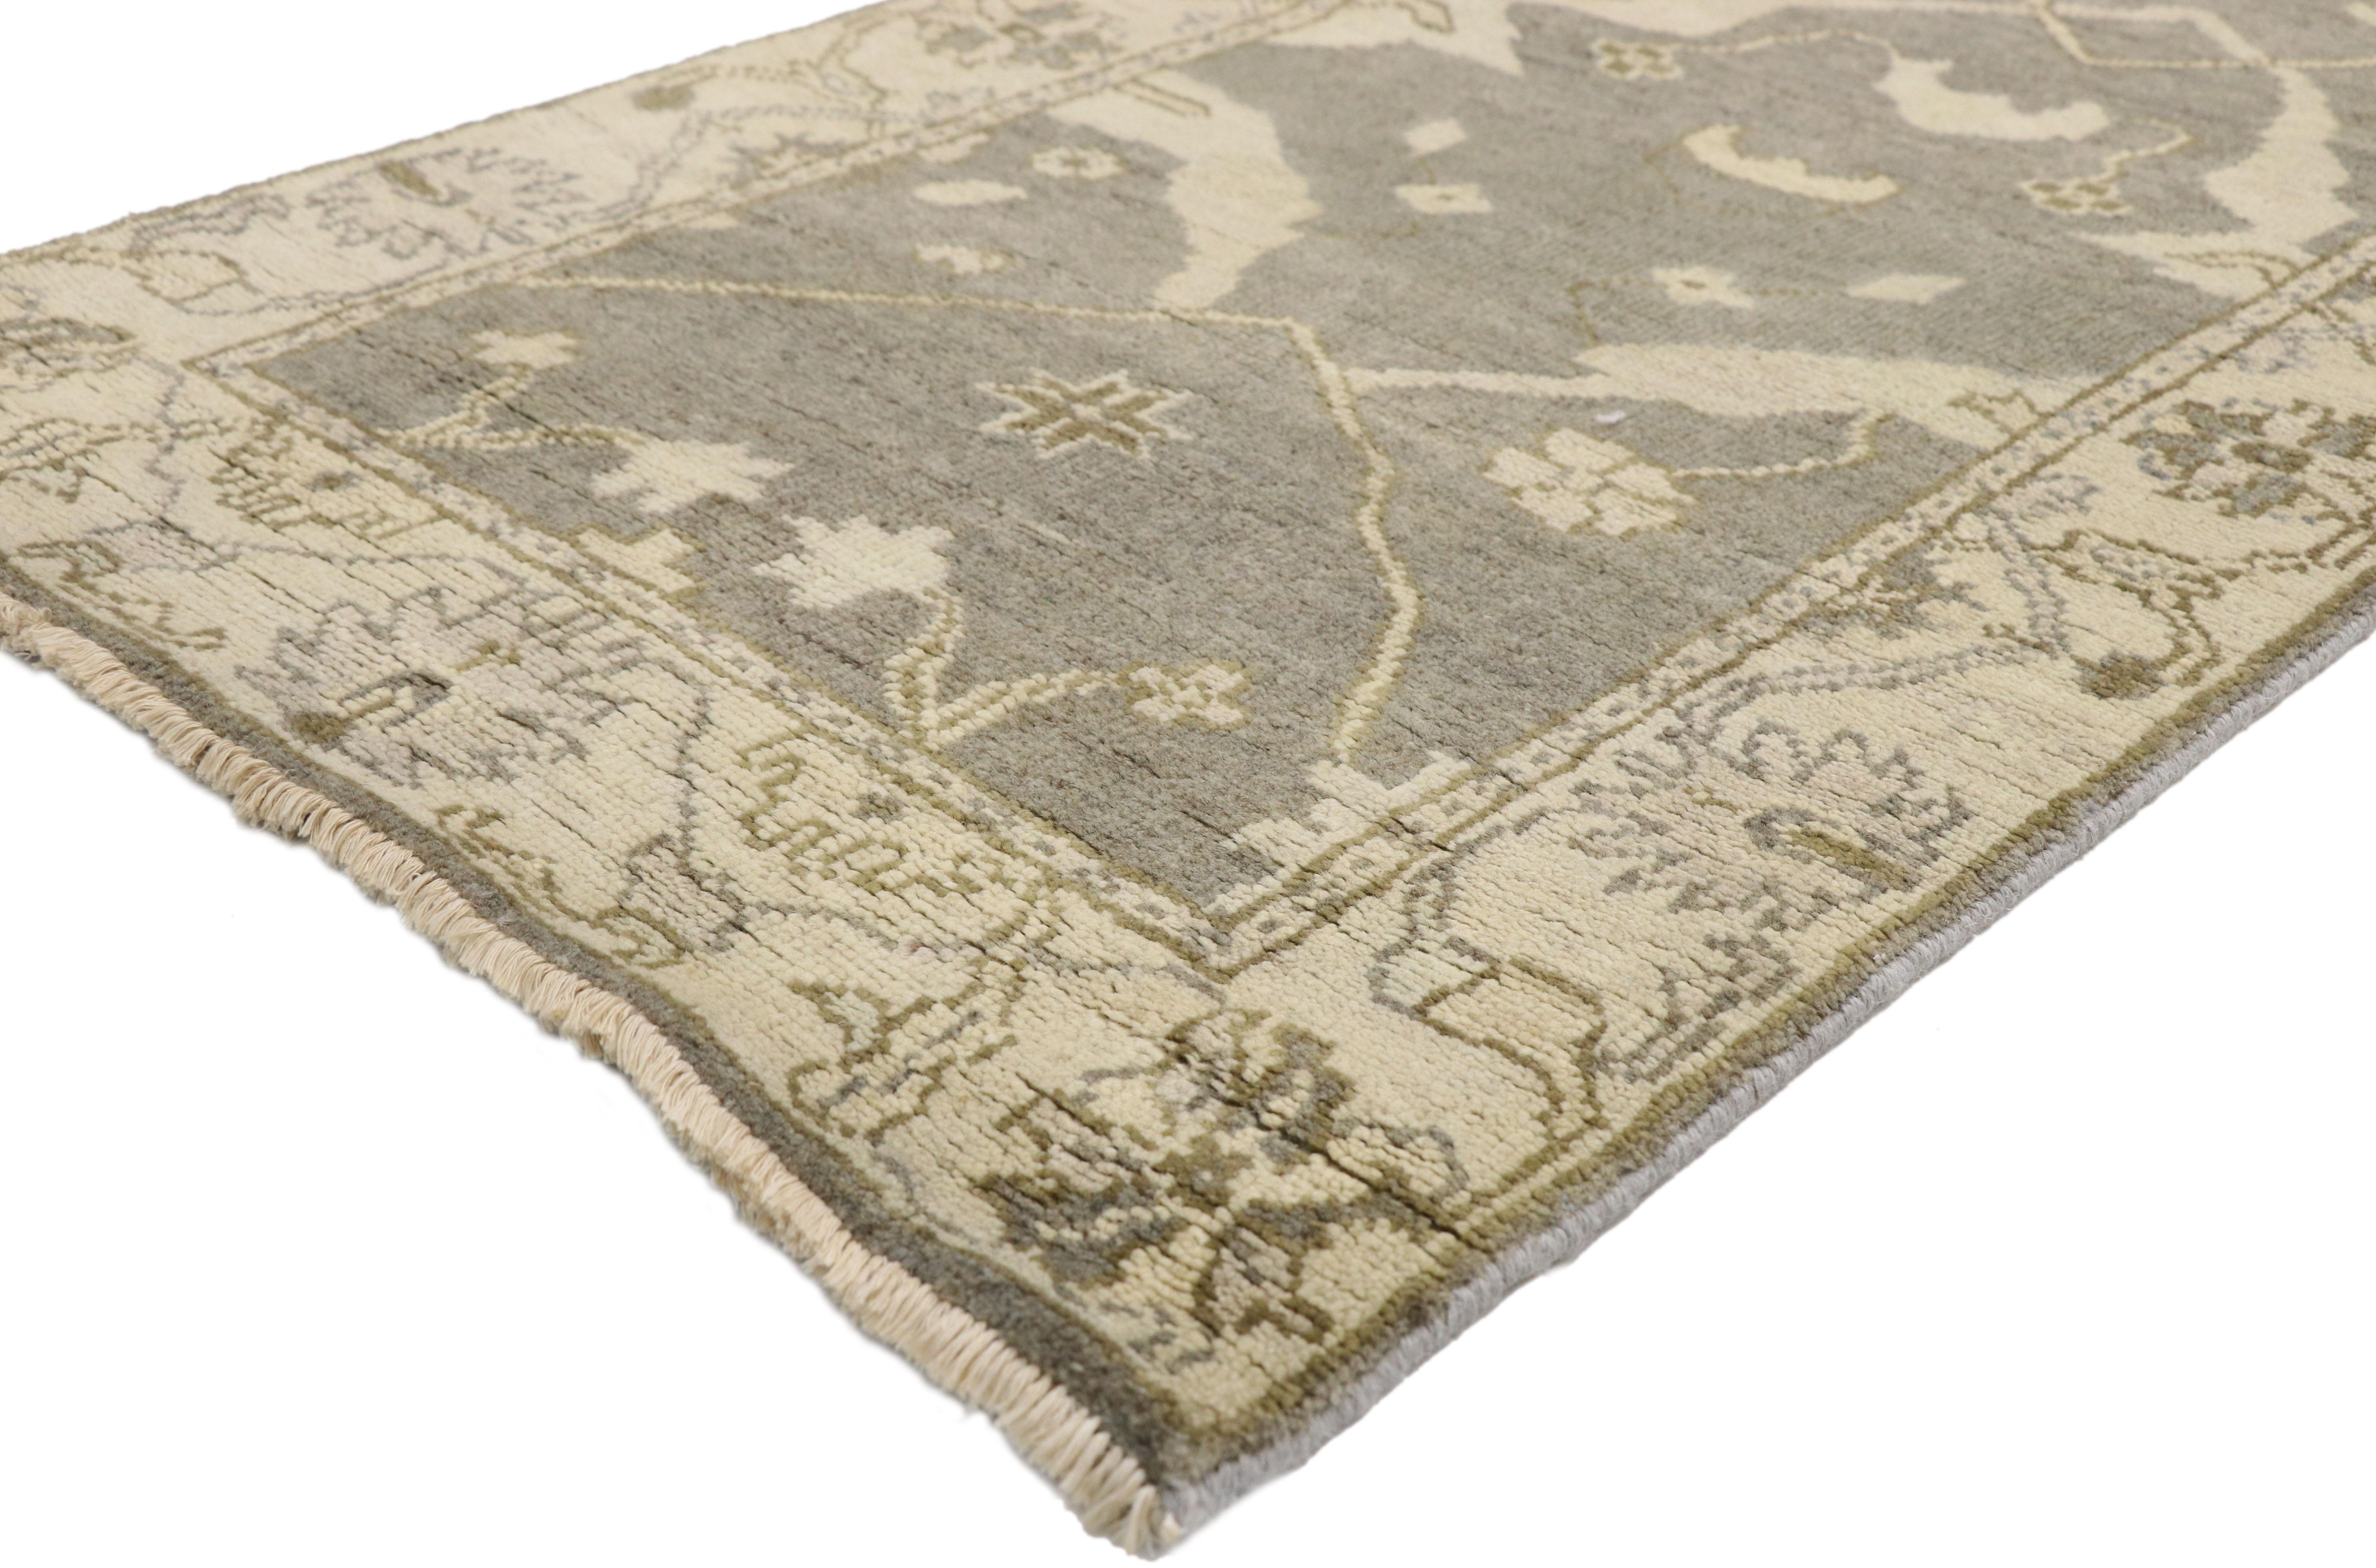 30205 neutral Oushak style geometric runner, hallway runner. Emanating grace and refinement, this neutral Oushak style runner features an overall geometric design with sweeping organic forms that contrast with an abrashed backdrop. Meanwhile smaller